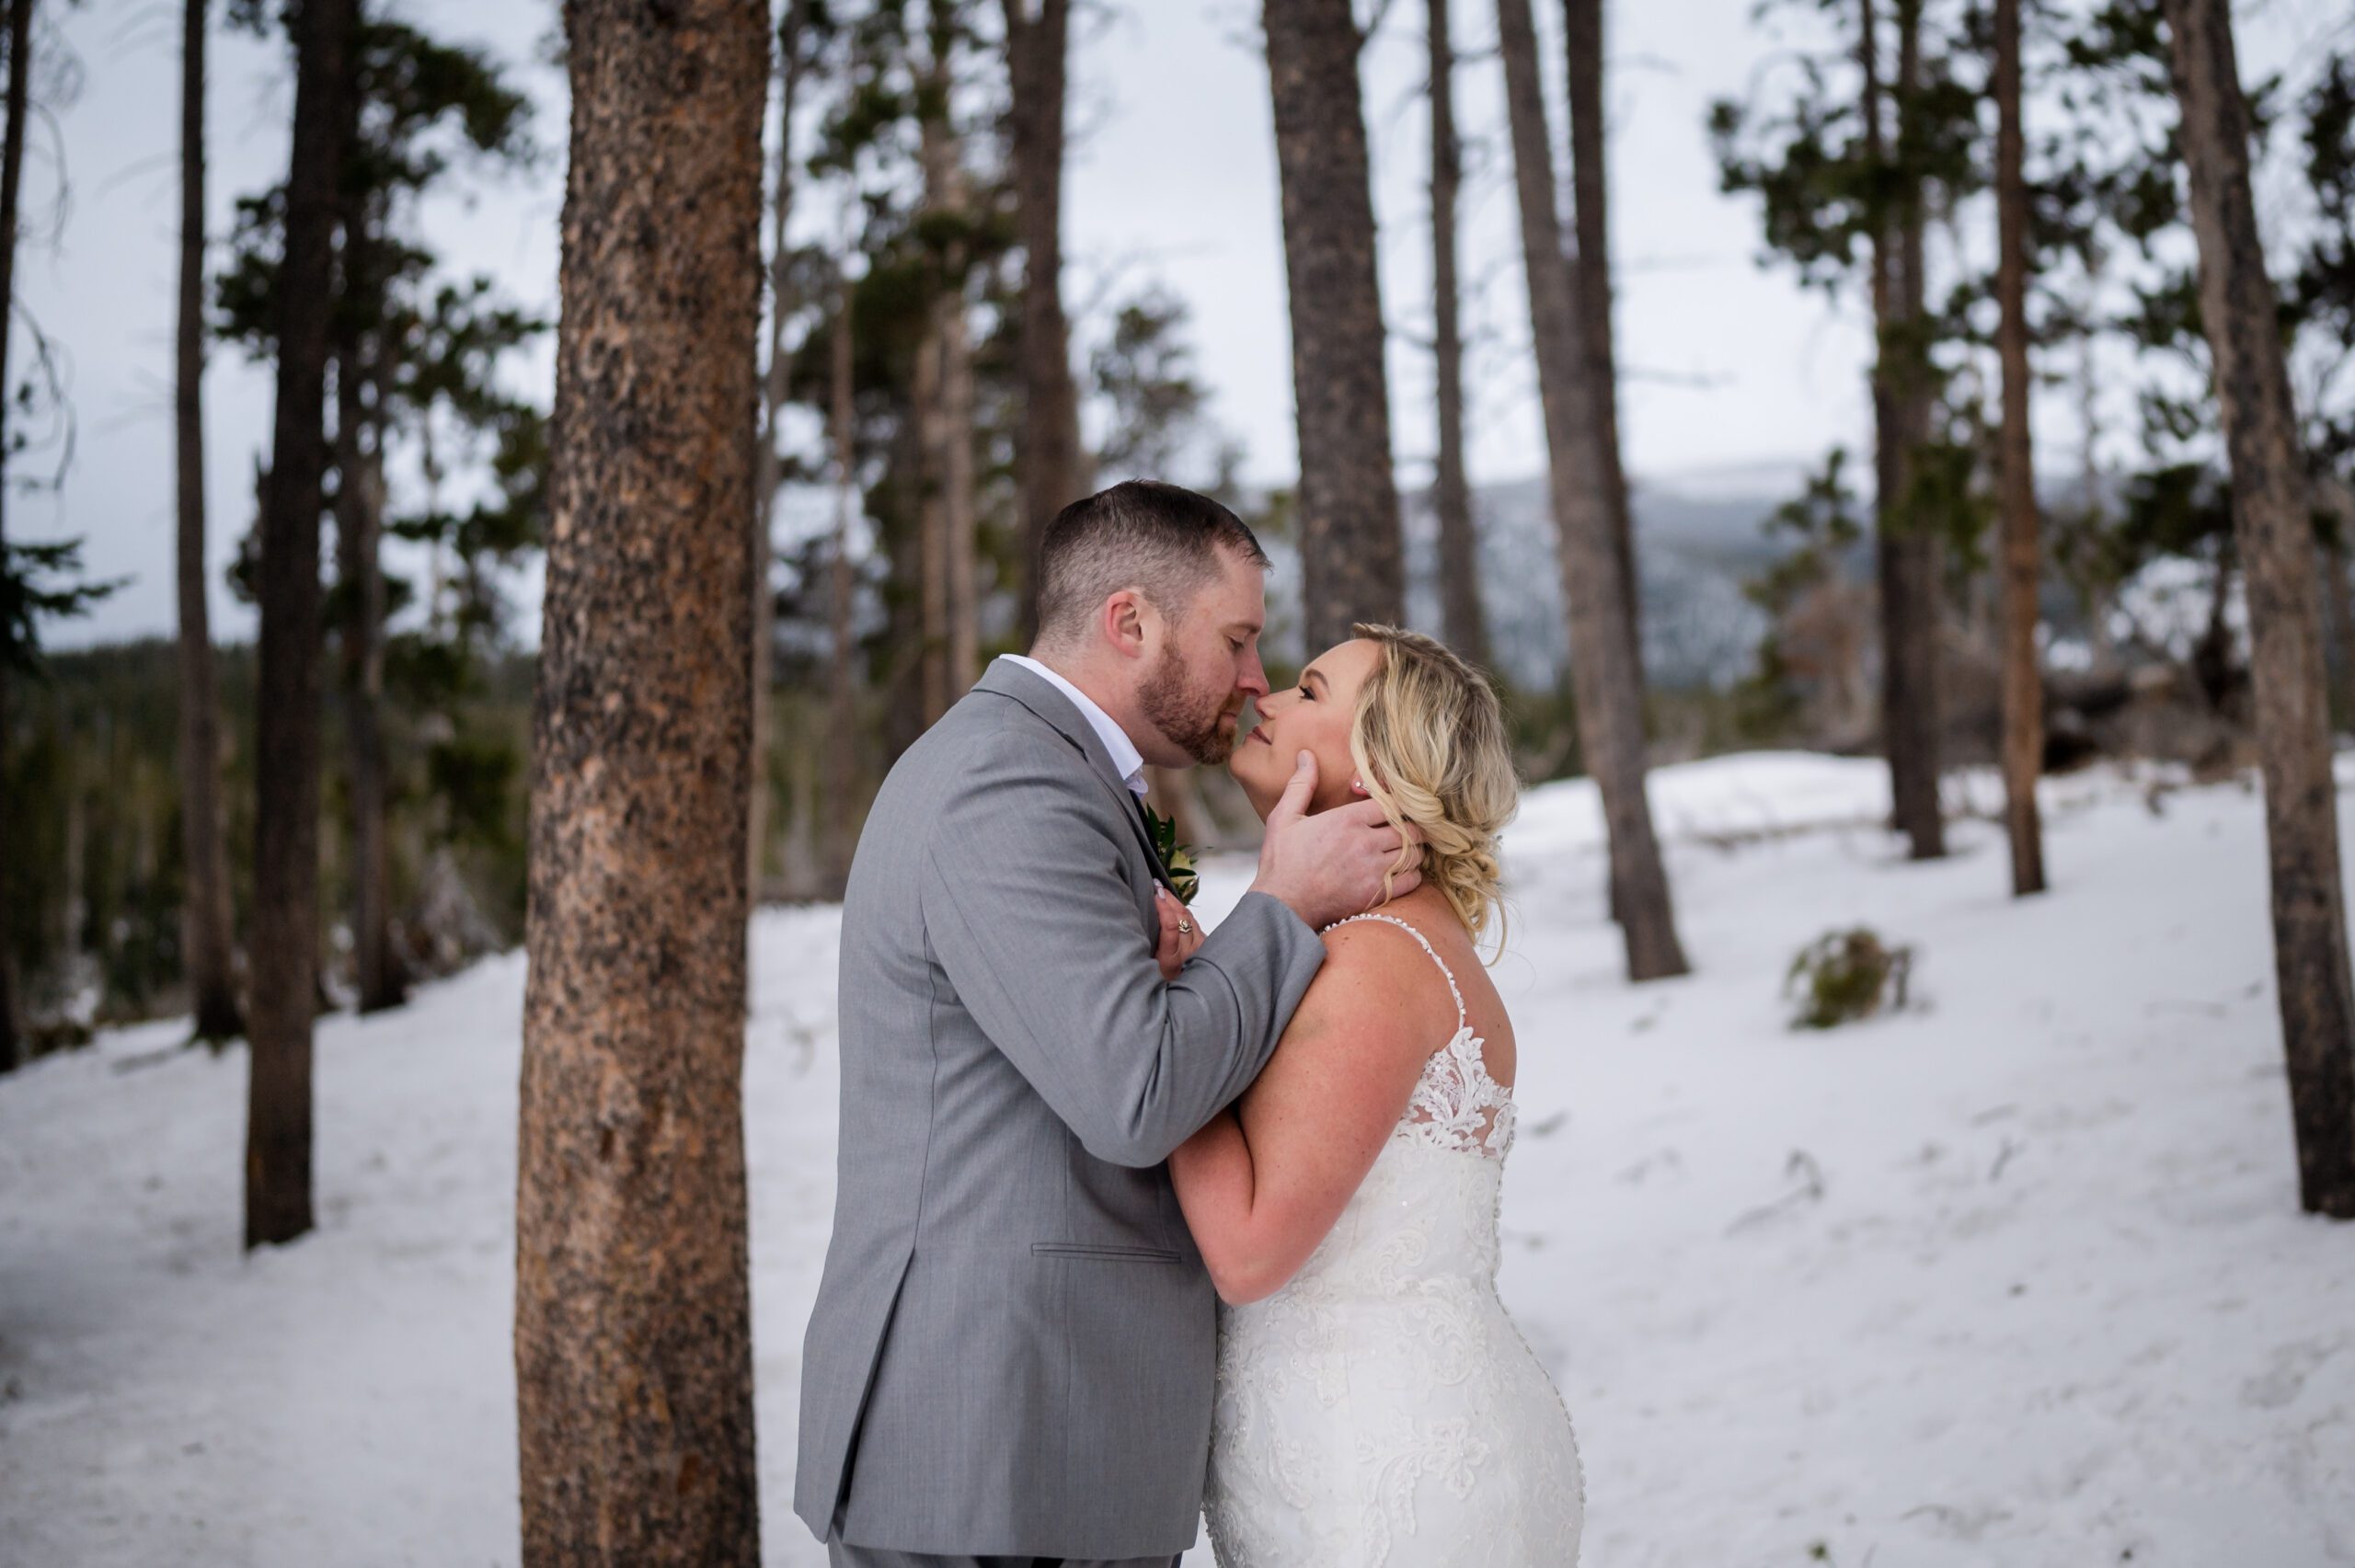 the bride and groom close to kissing in the snowy winter landscape - during their Winter Elopement at Sprague Lake. 